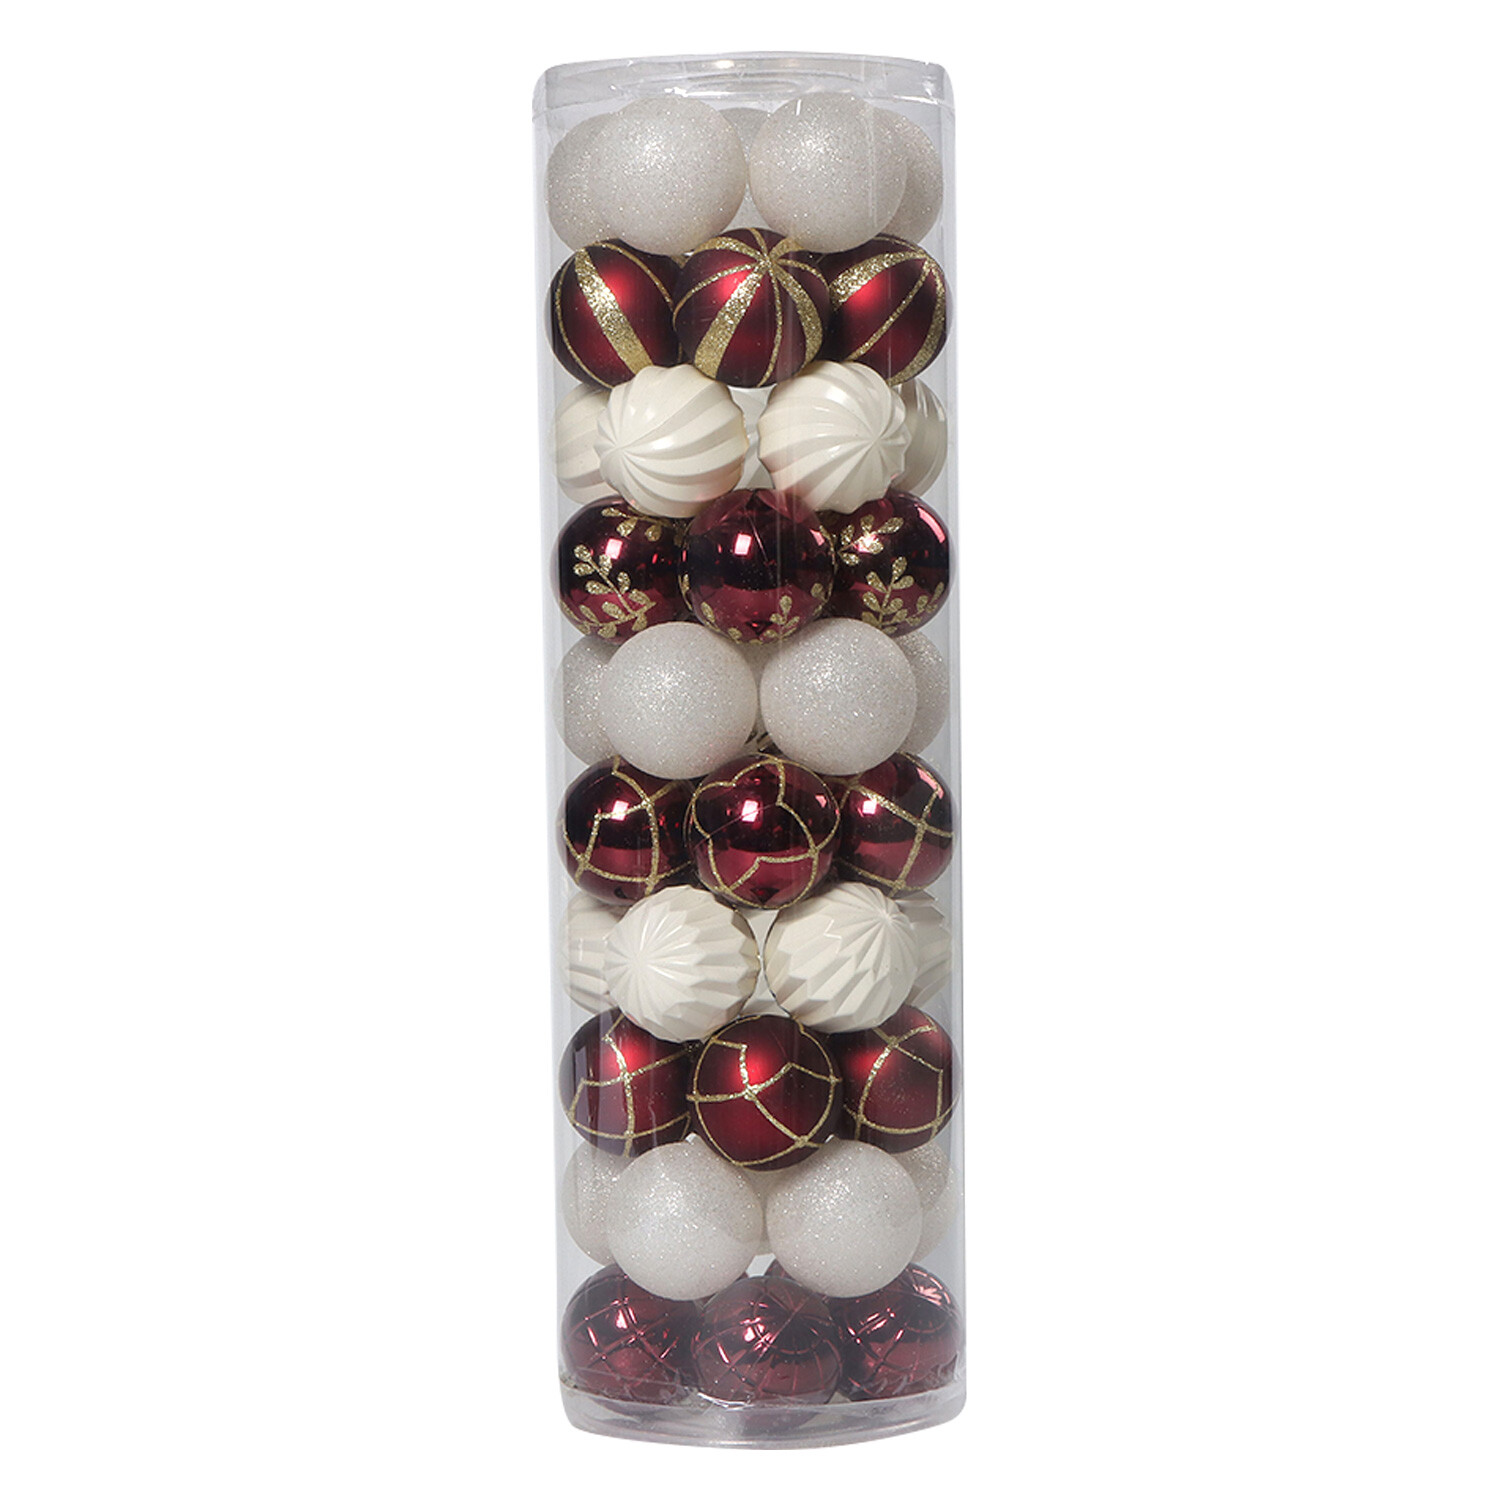 Pack of 50 Grace & Glory Baubles - Burgundy Image